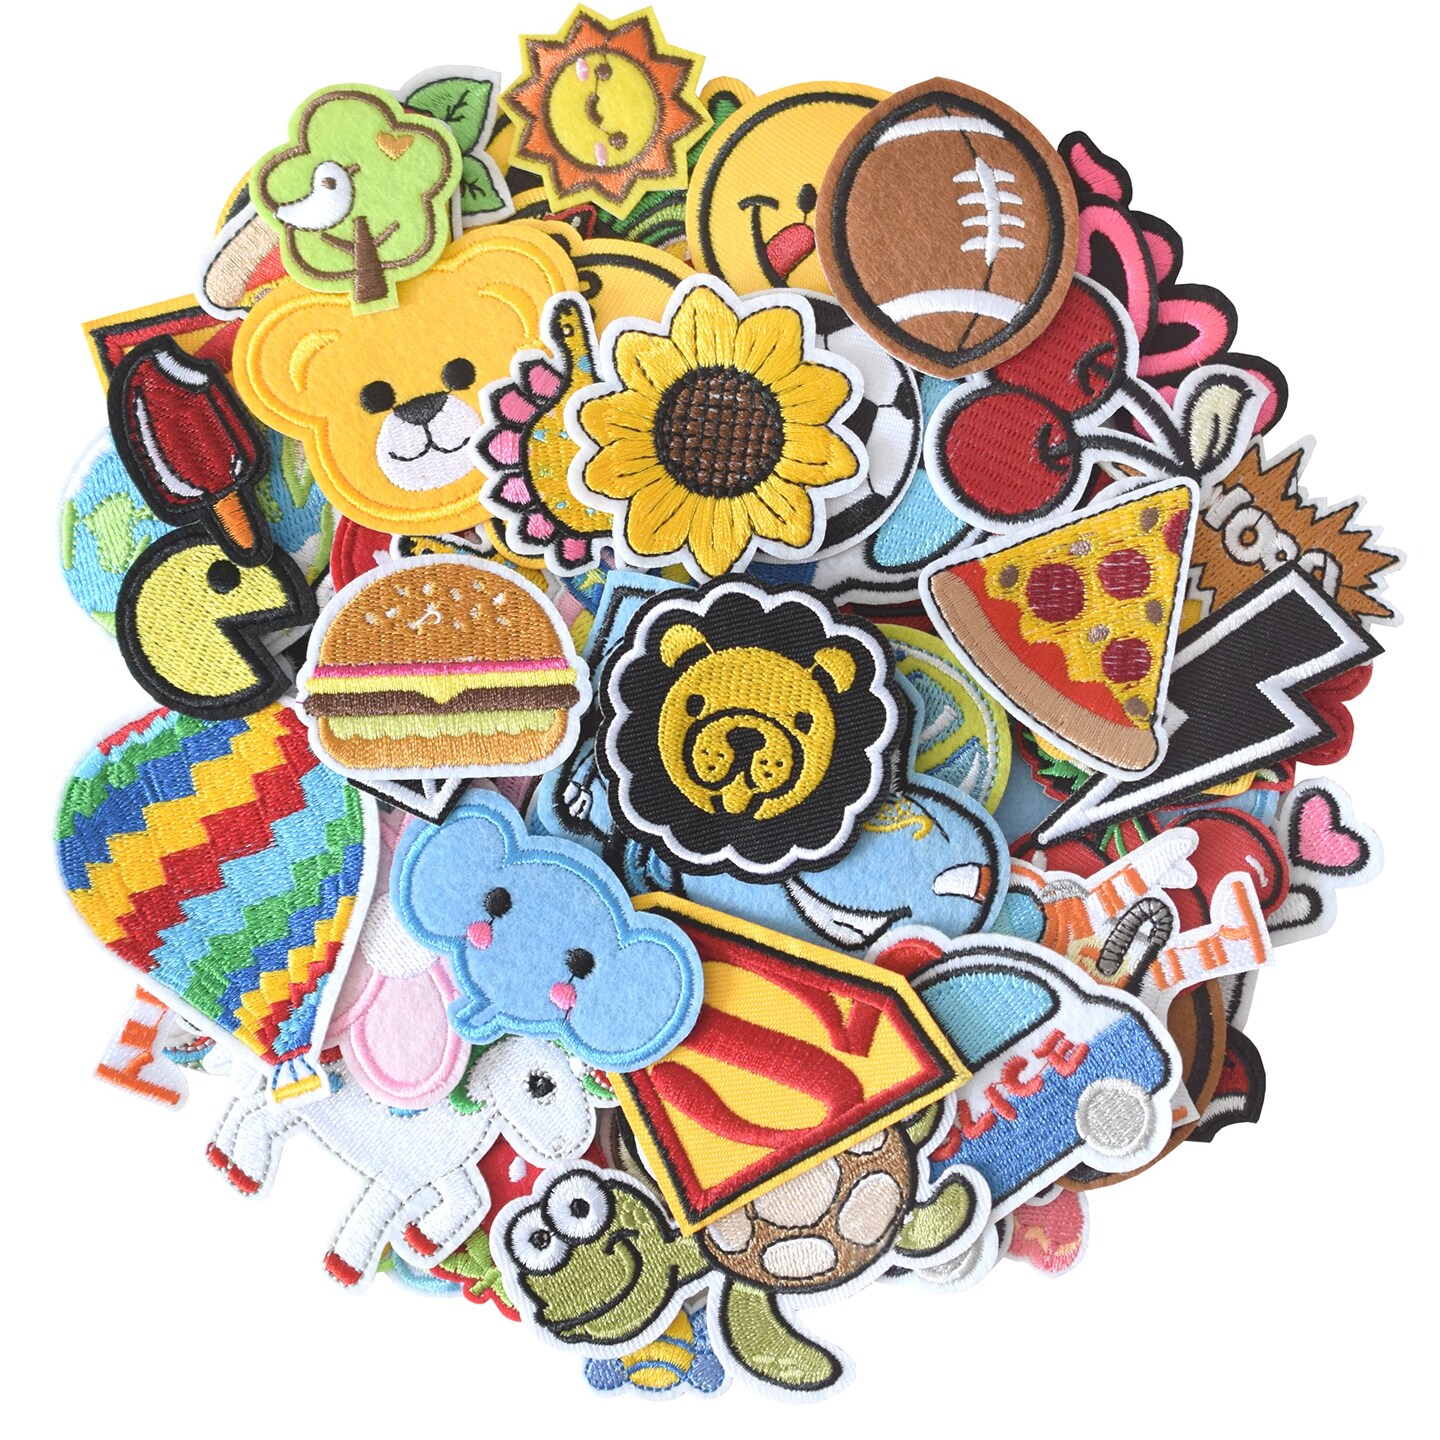 60Pcs Random Assorted Iron on Patches, Cute Sew on/Iron on Embroidered Applique Patches for Jackets, Hats, Backpacks, Jeans, DIY Accessories